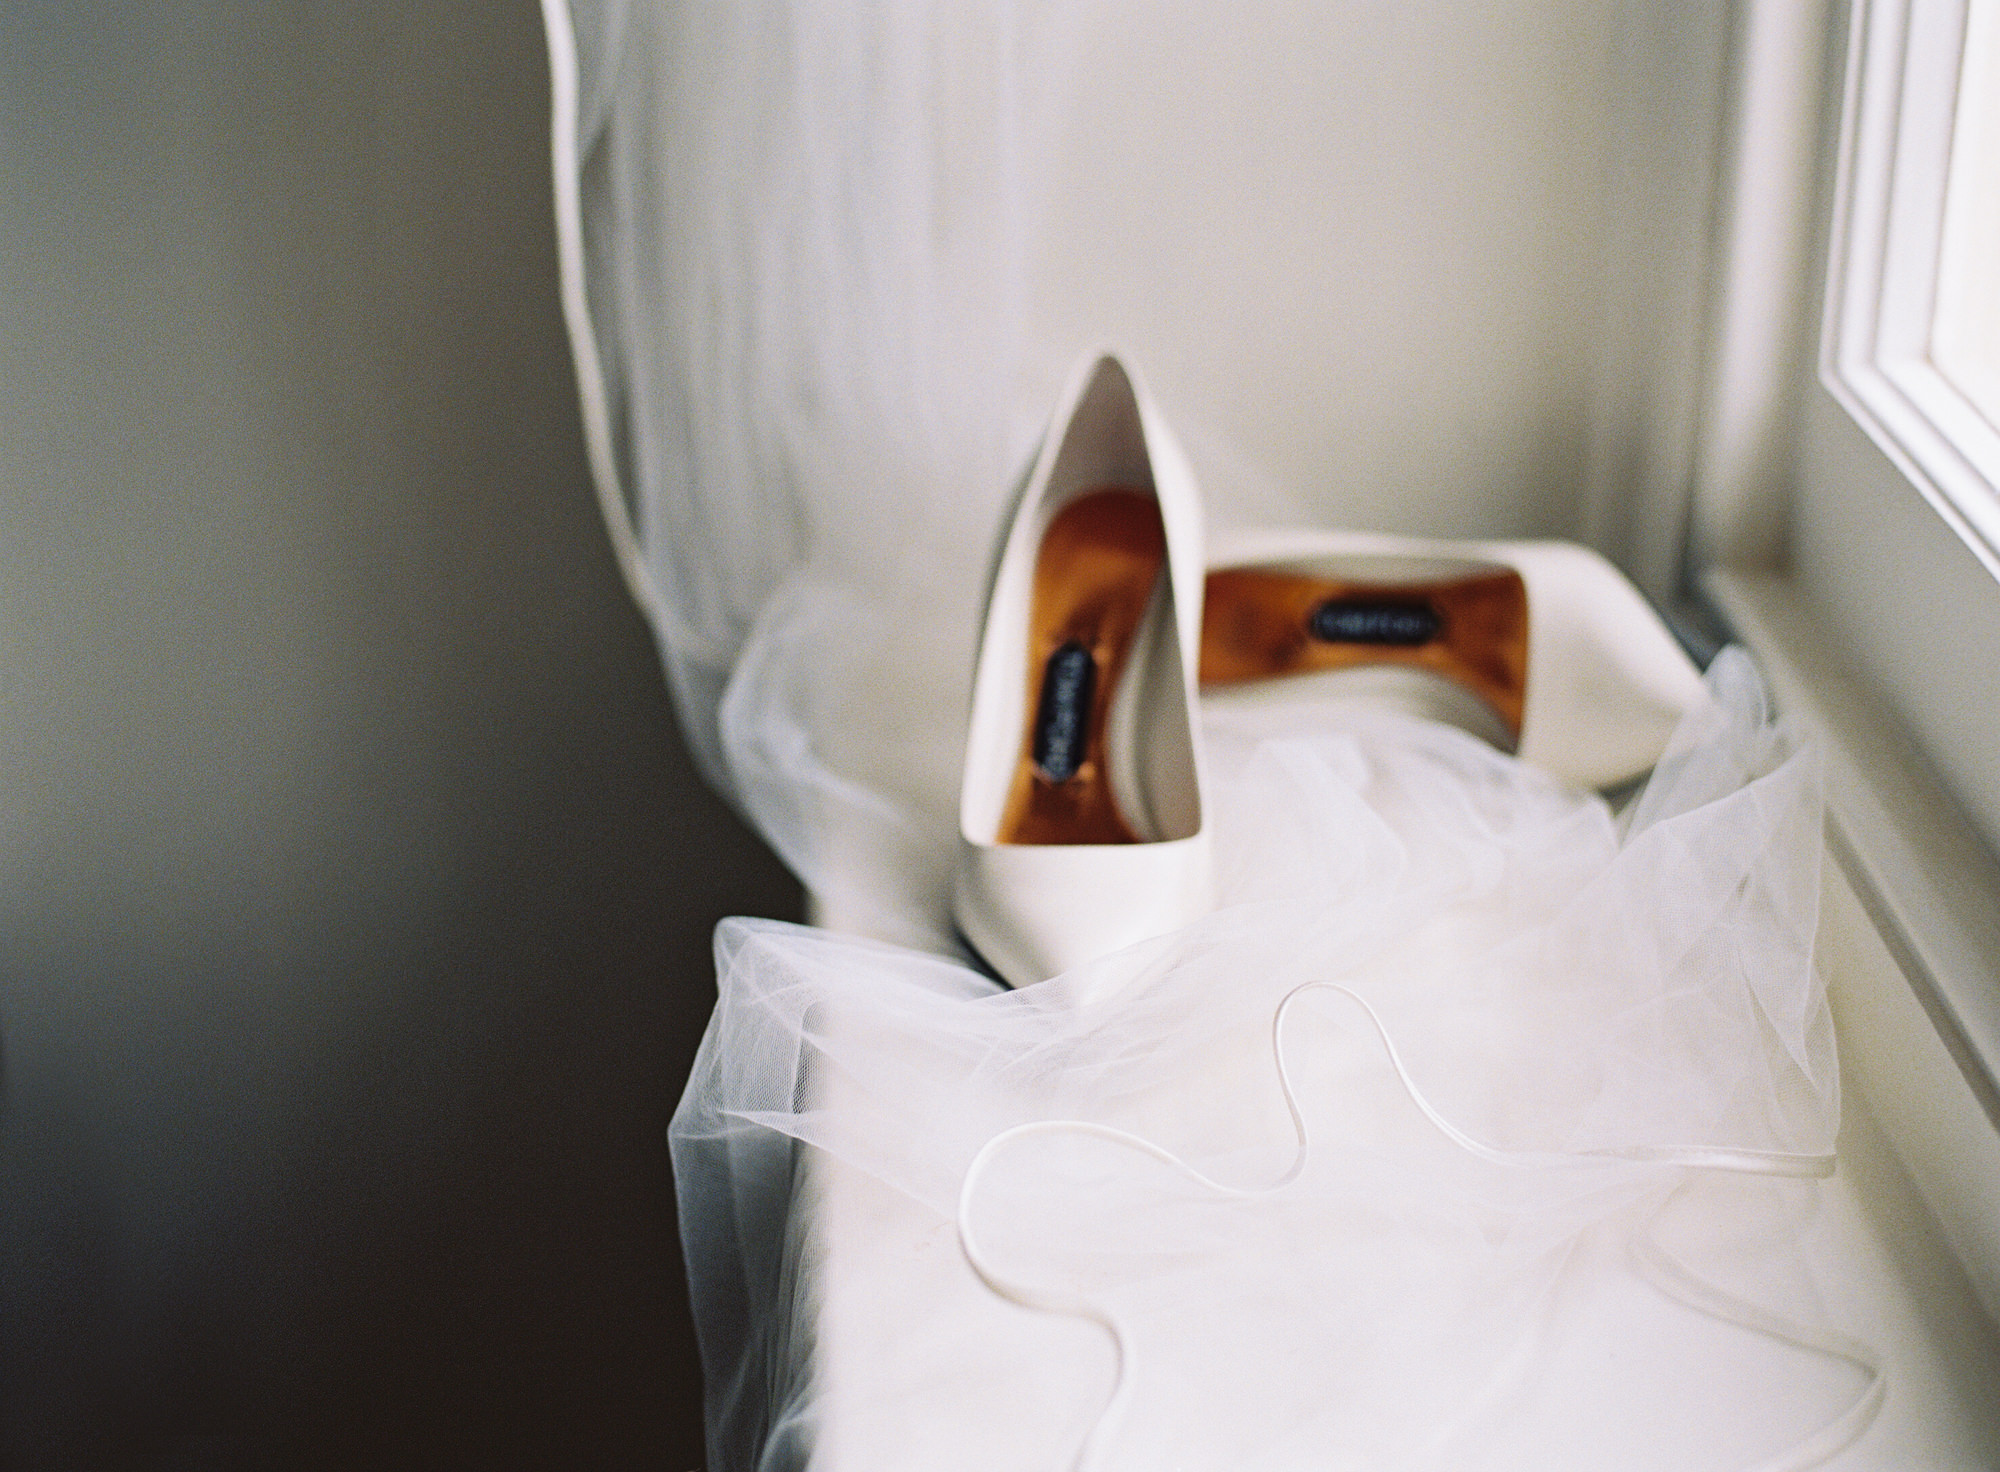 Tom Ford wedding shoes with veil on windowsill at Thorpe Manor Oxford